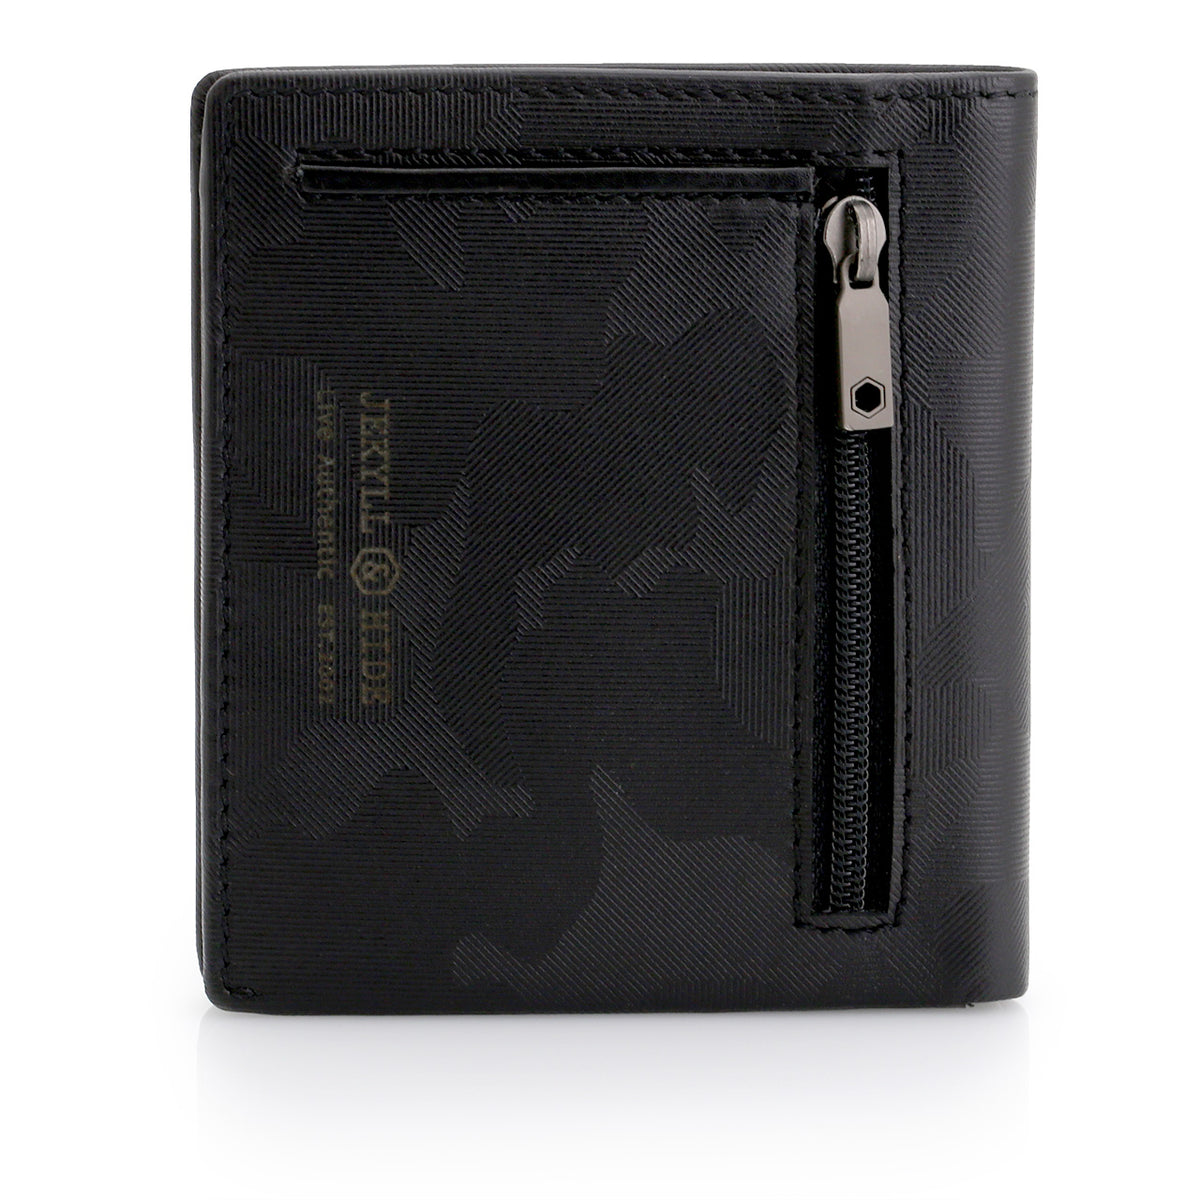 Jekyll and Hyde Slim Bifold wallet with zippered Coin pouch back- Havana Camo colour